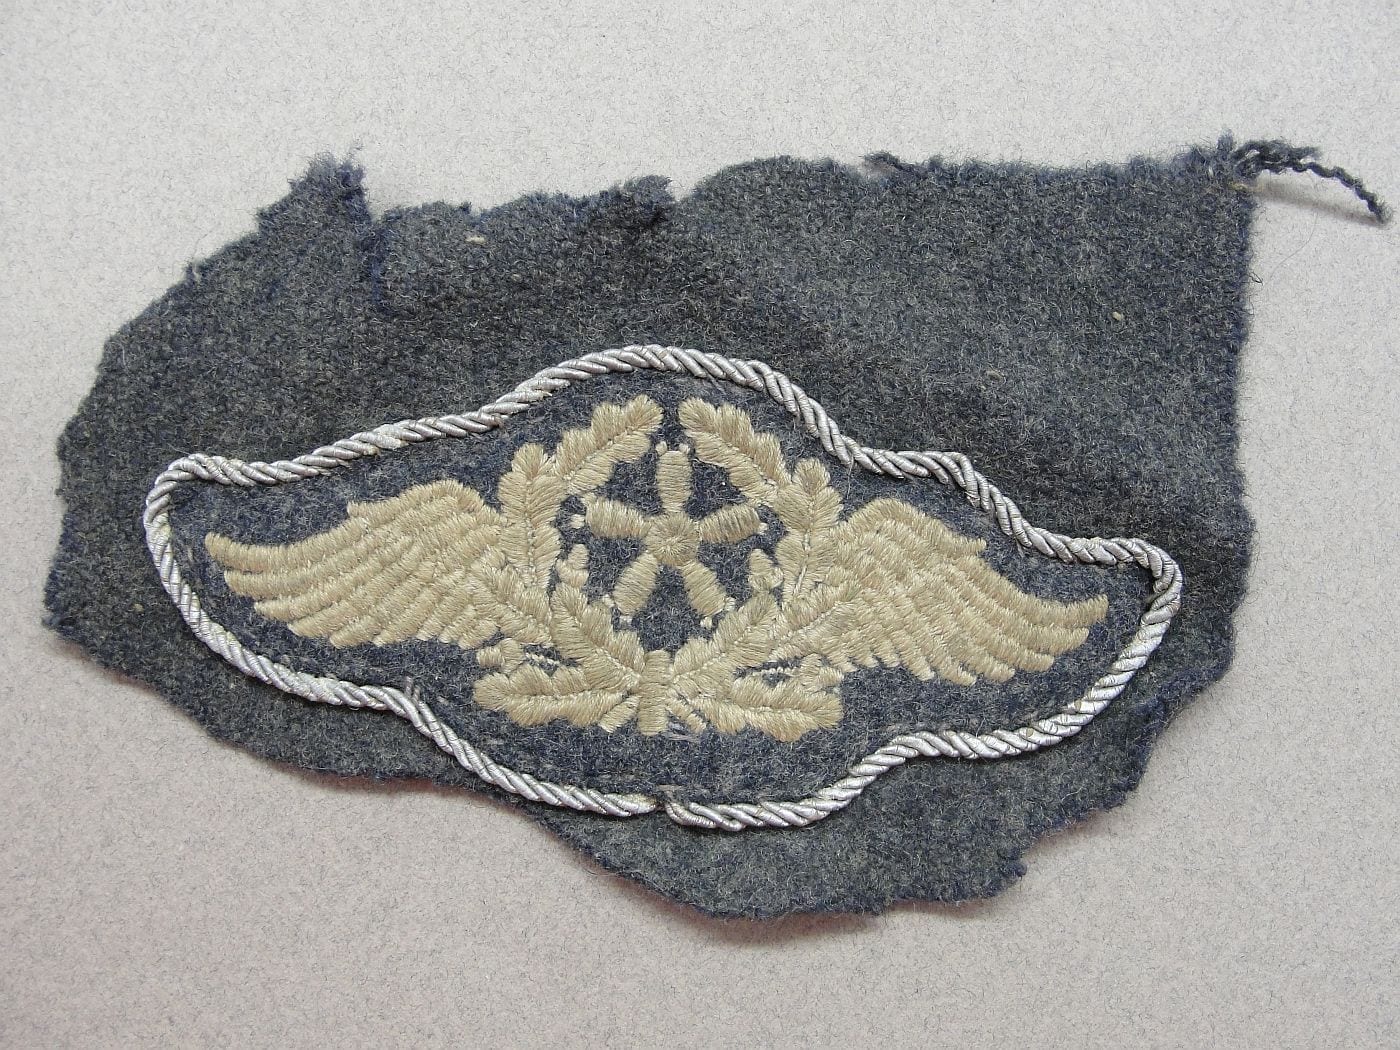 Luftwaffe Technical Rating with Chord on Tunic Piece